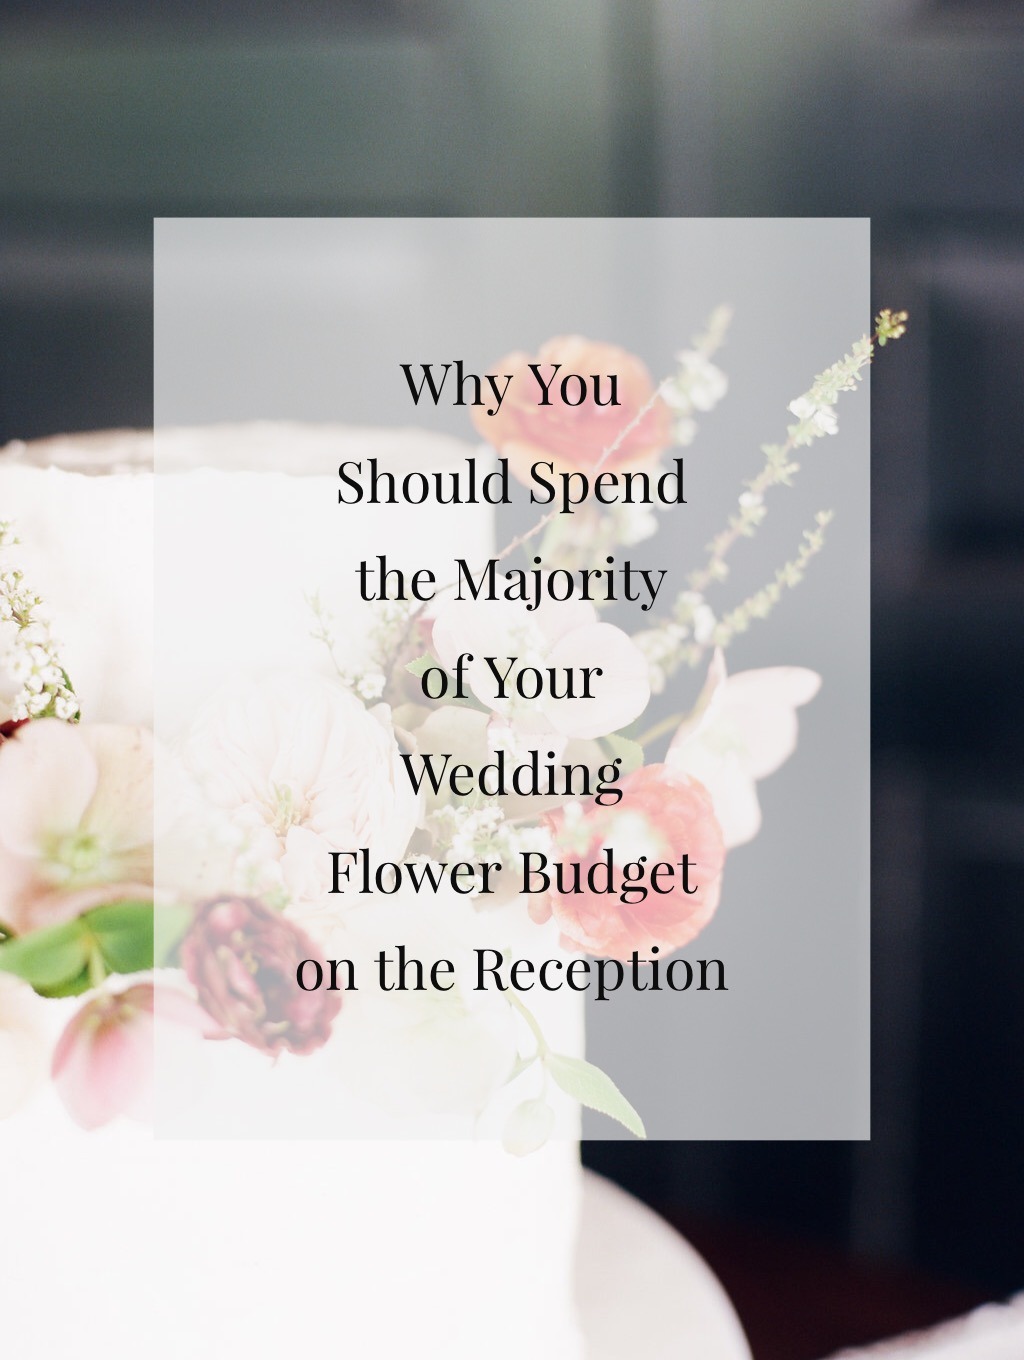 Why You Should Spend the Majority of Your Wedding Budget on the Reception